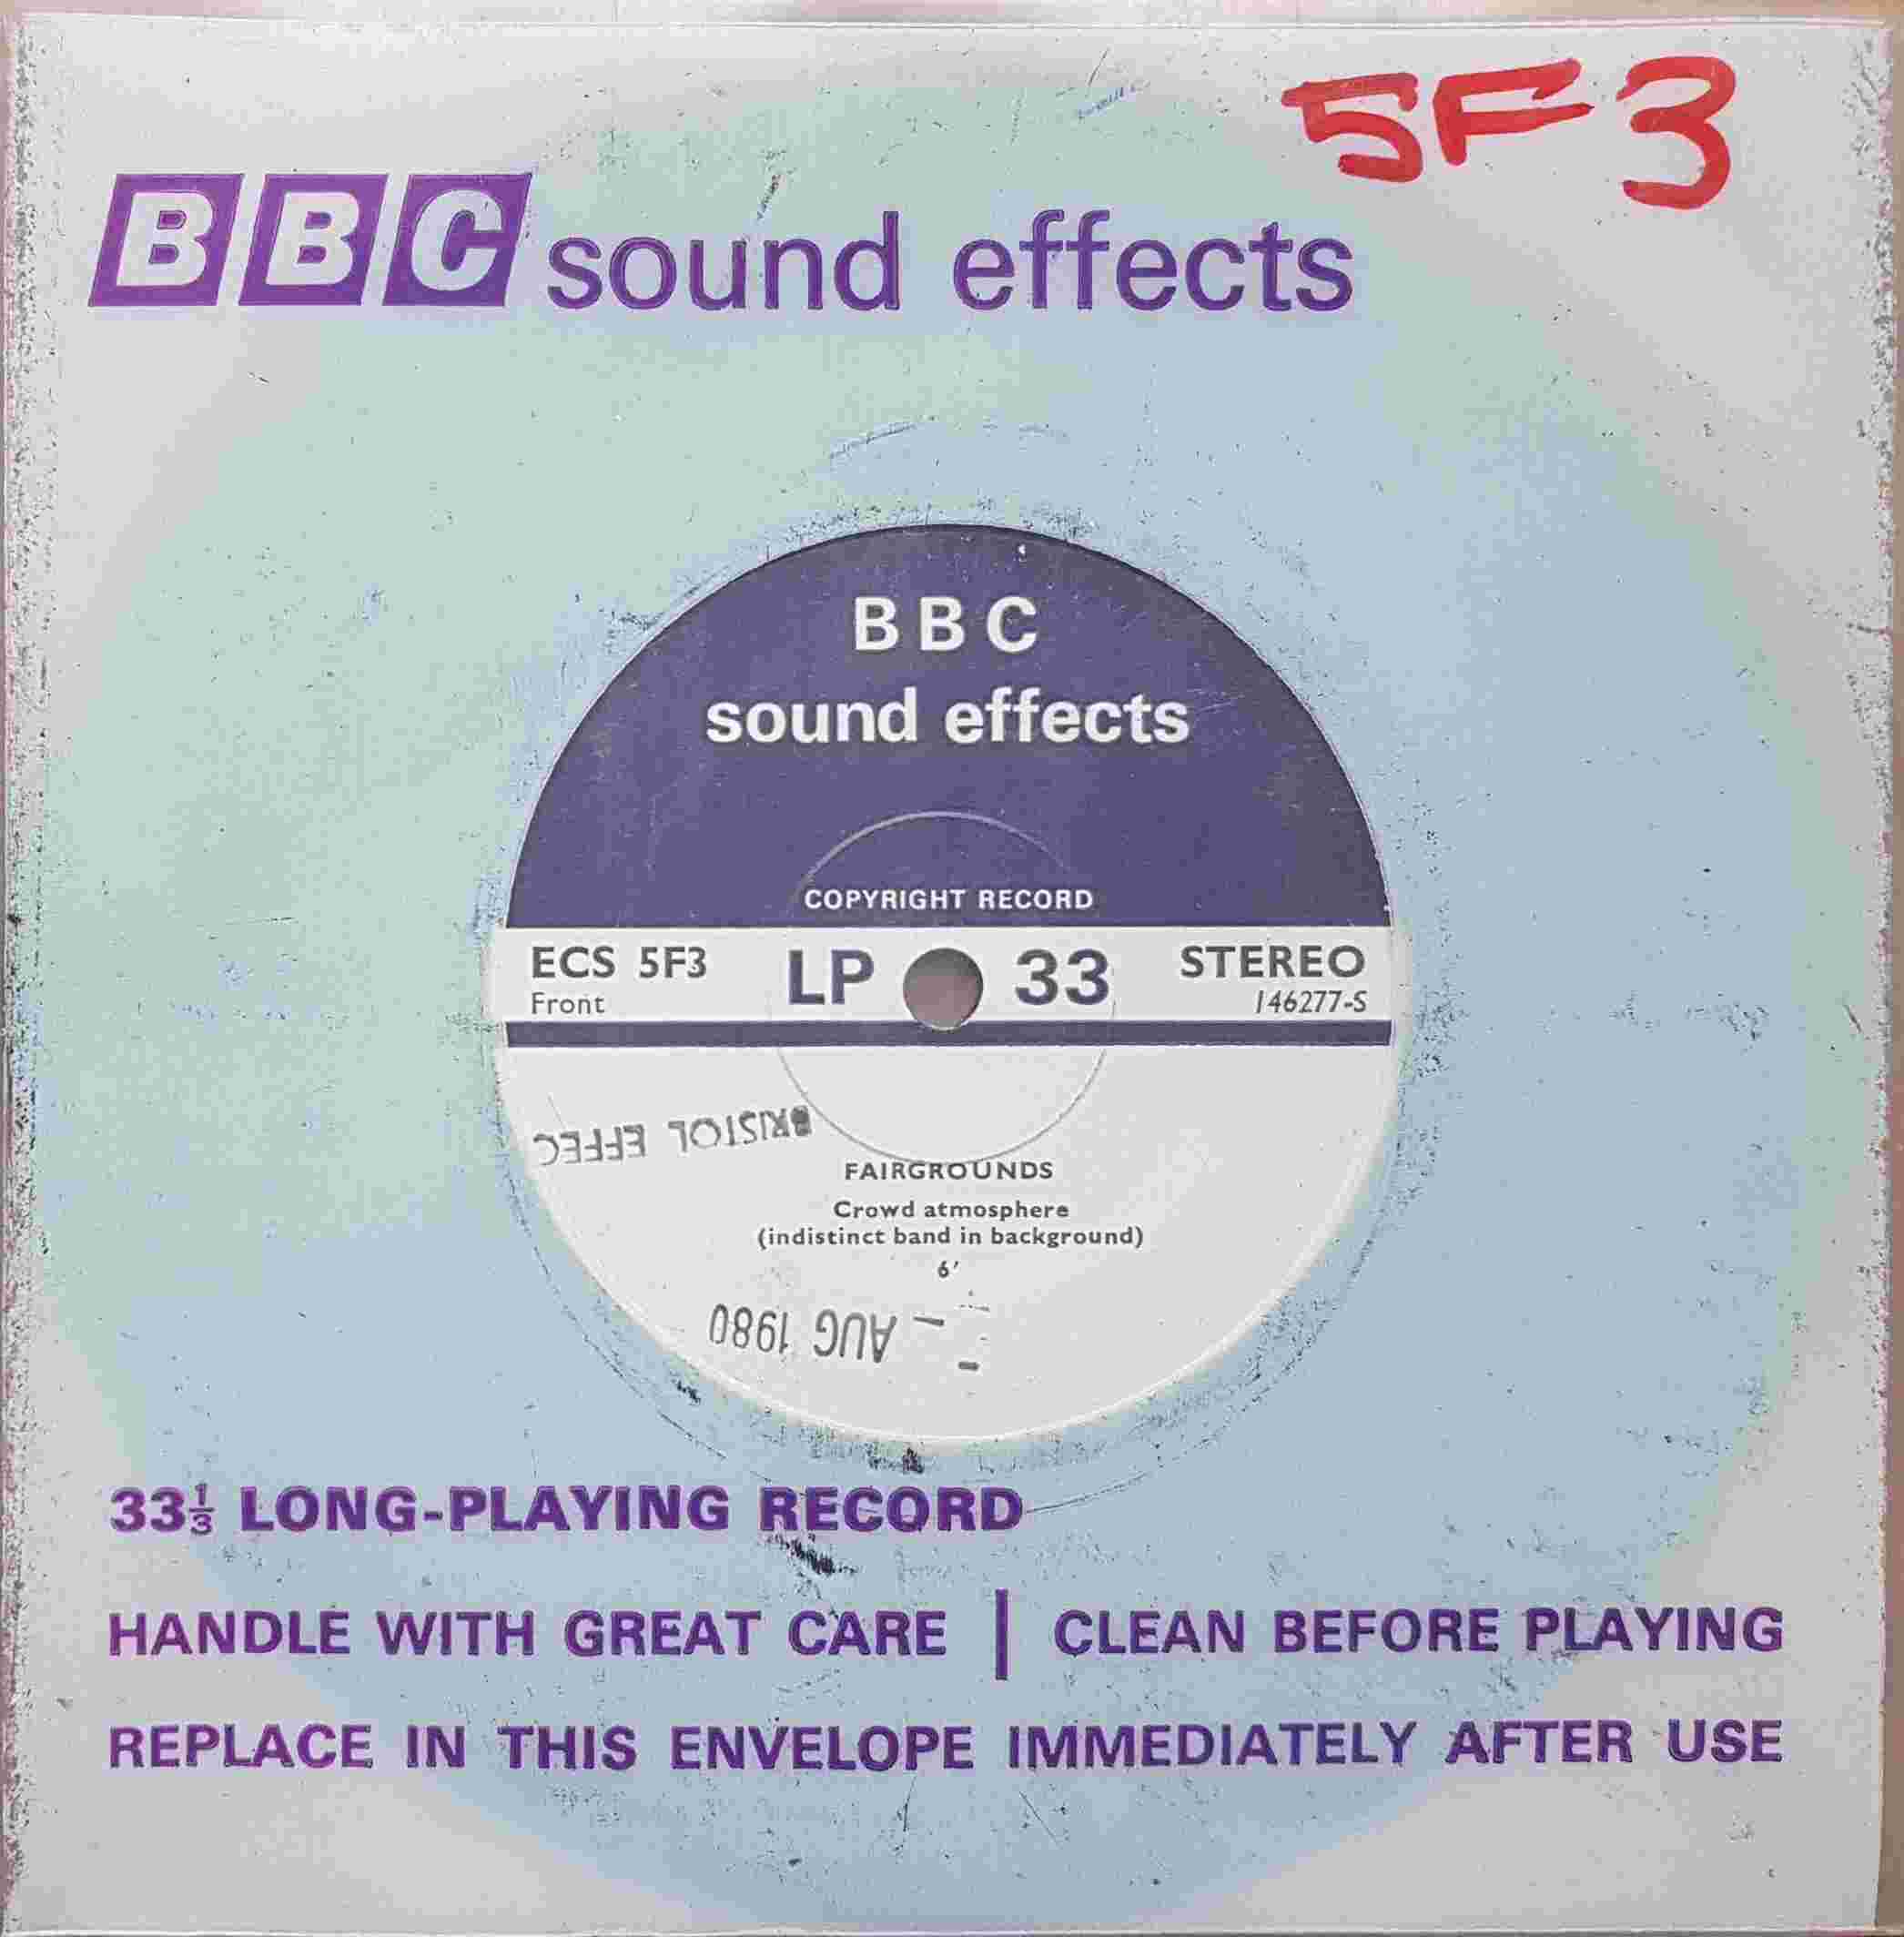 Picture of ECS 5F3 Fairgrounds by artist Not registered from the BBC singles - Records and Tapes library